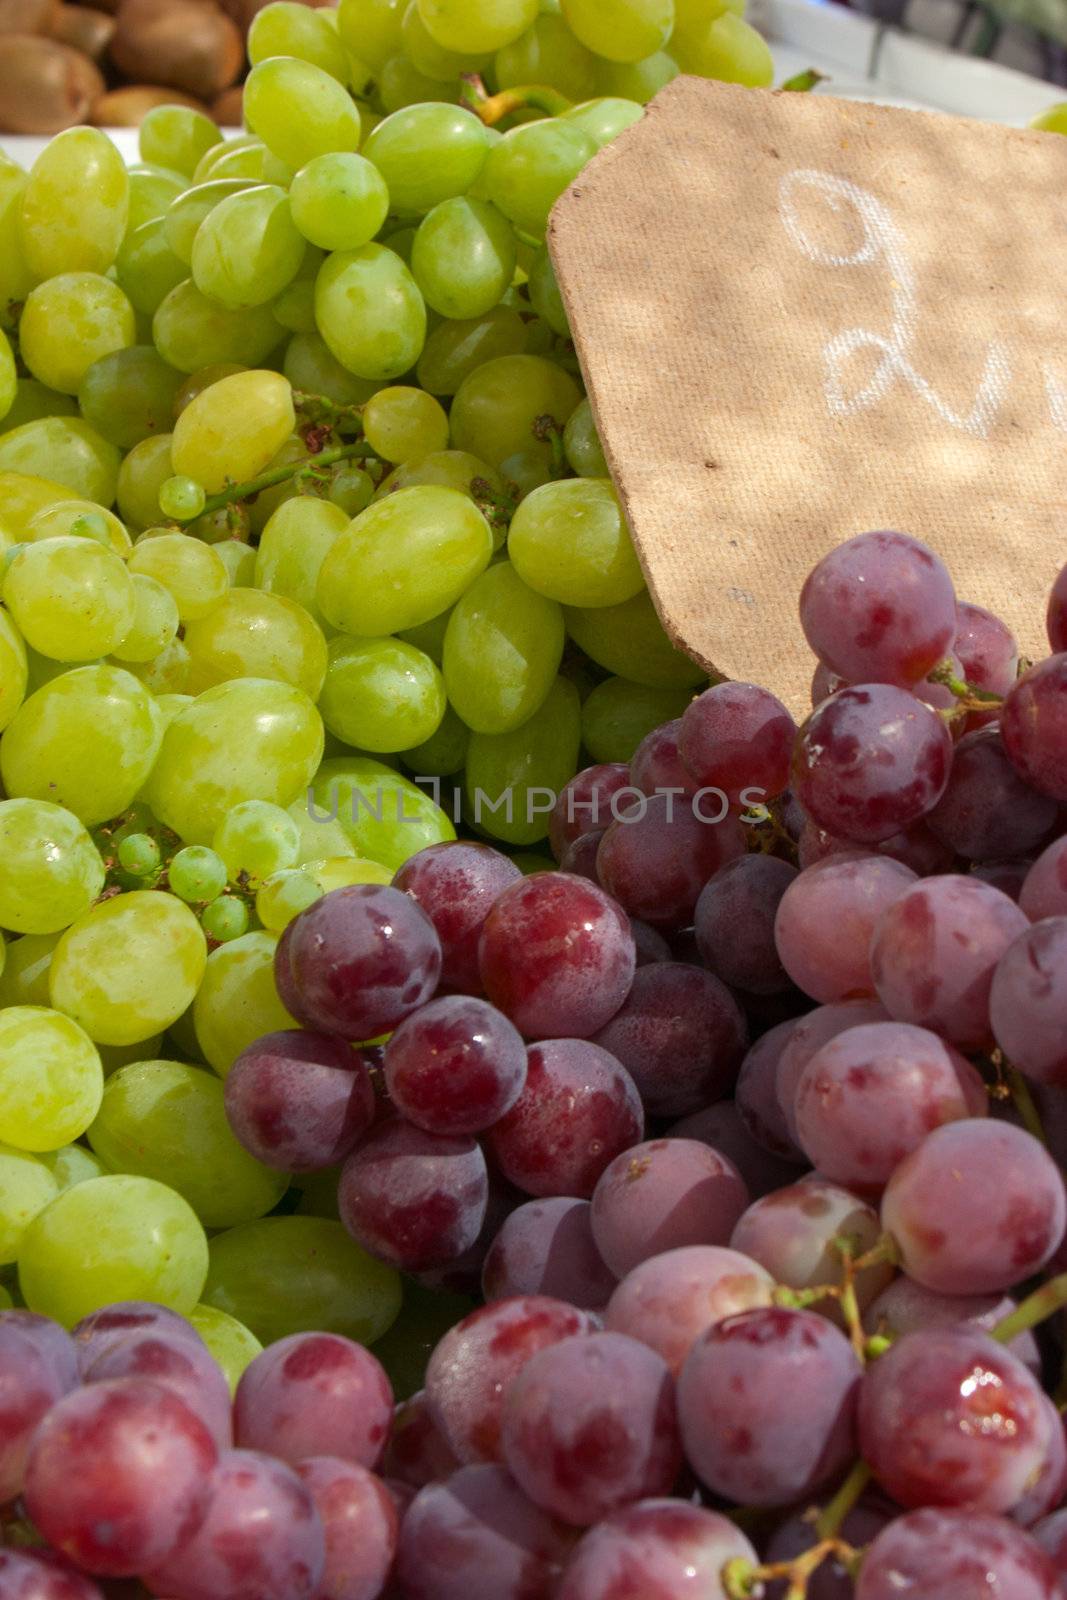 White and blue grapes at the local market